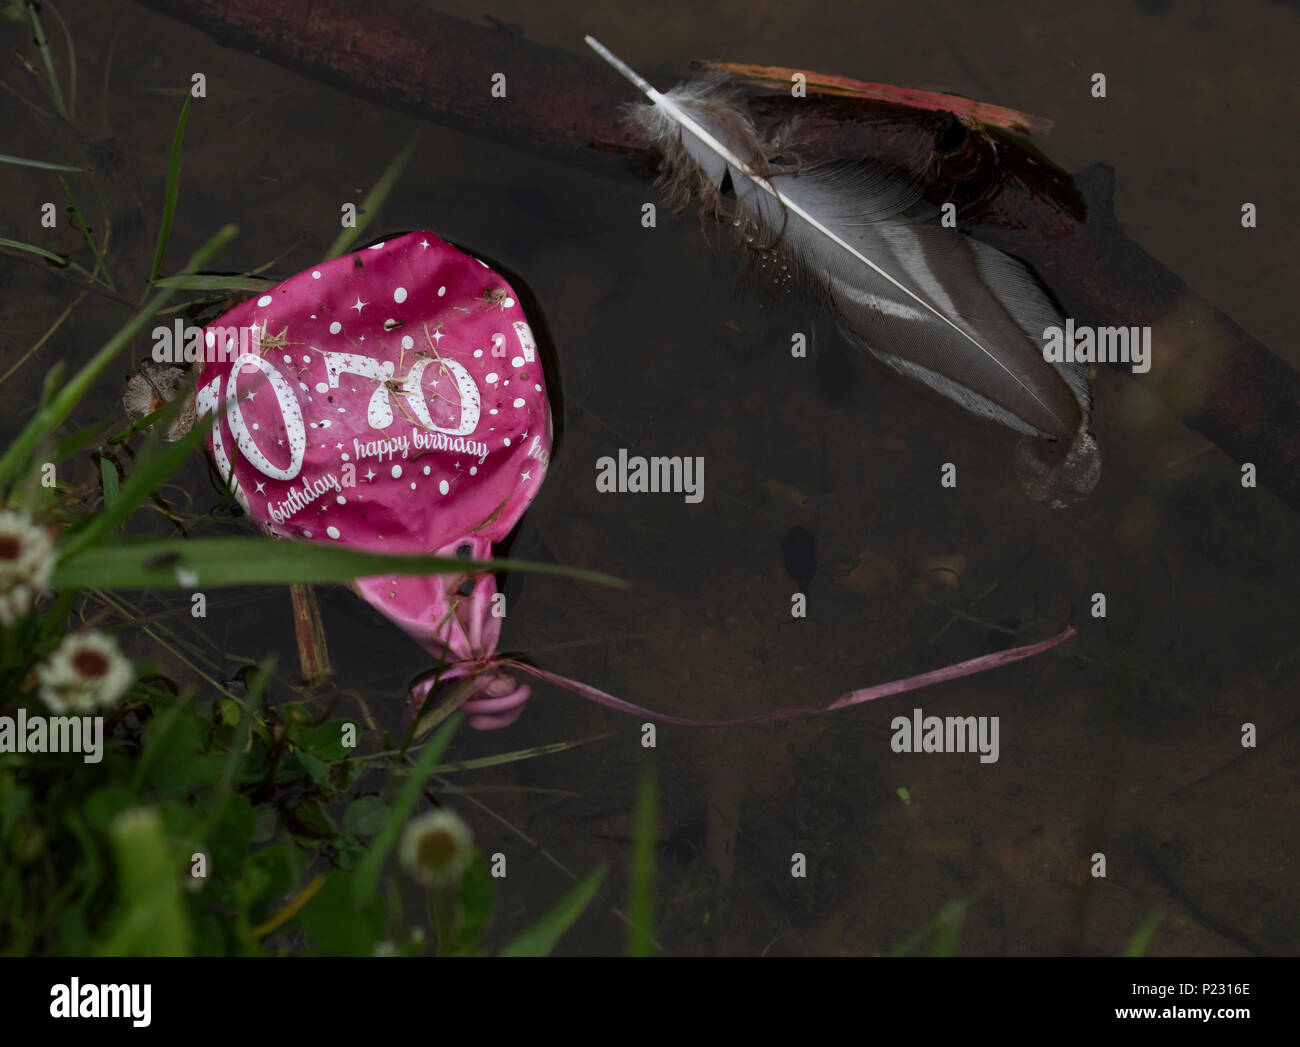 A discarded balloon floats on a wildlife pond causing environmental damage. Stock Photo